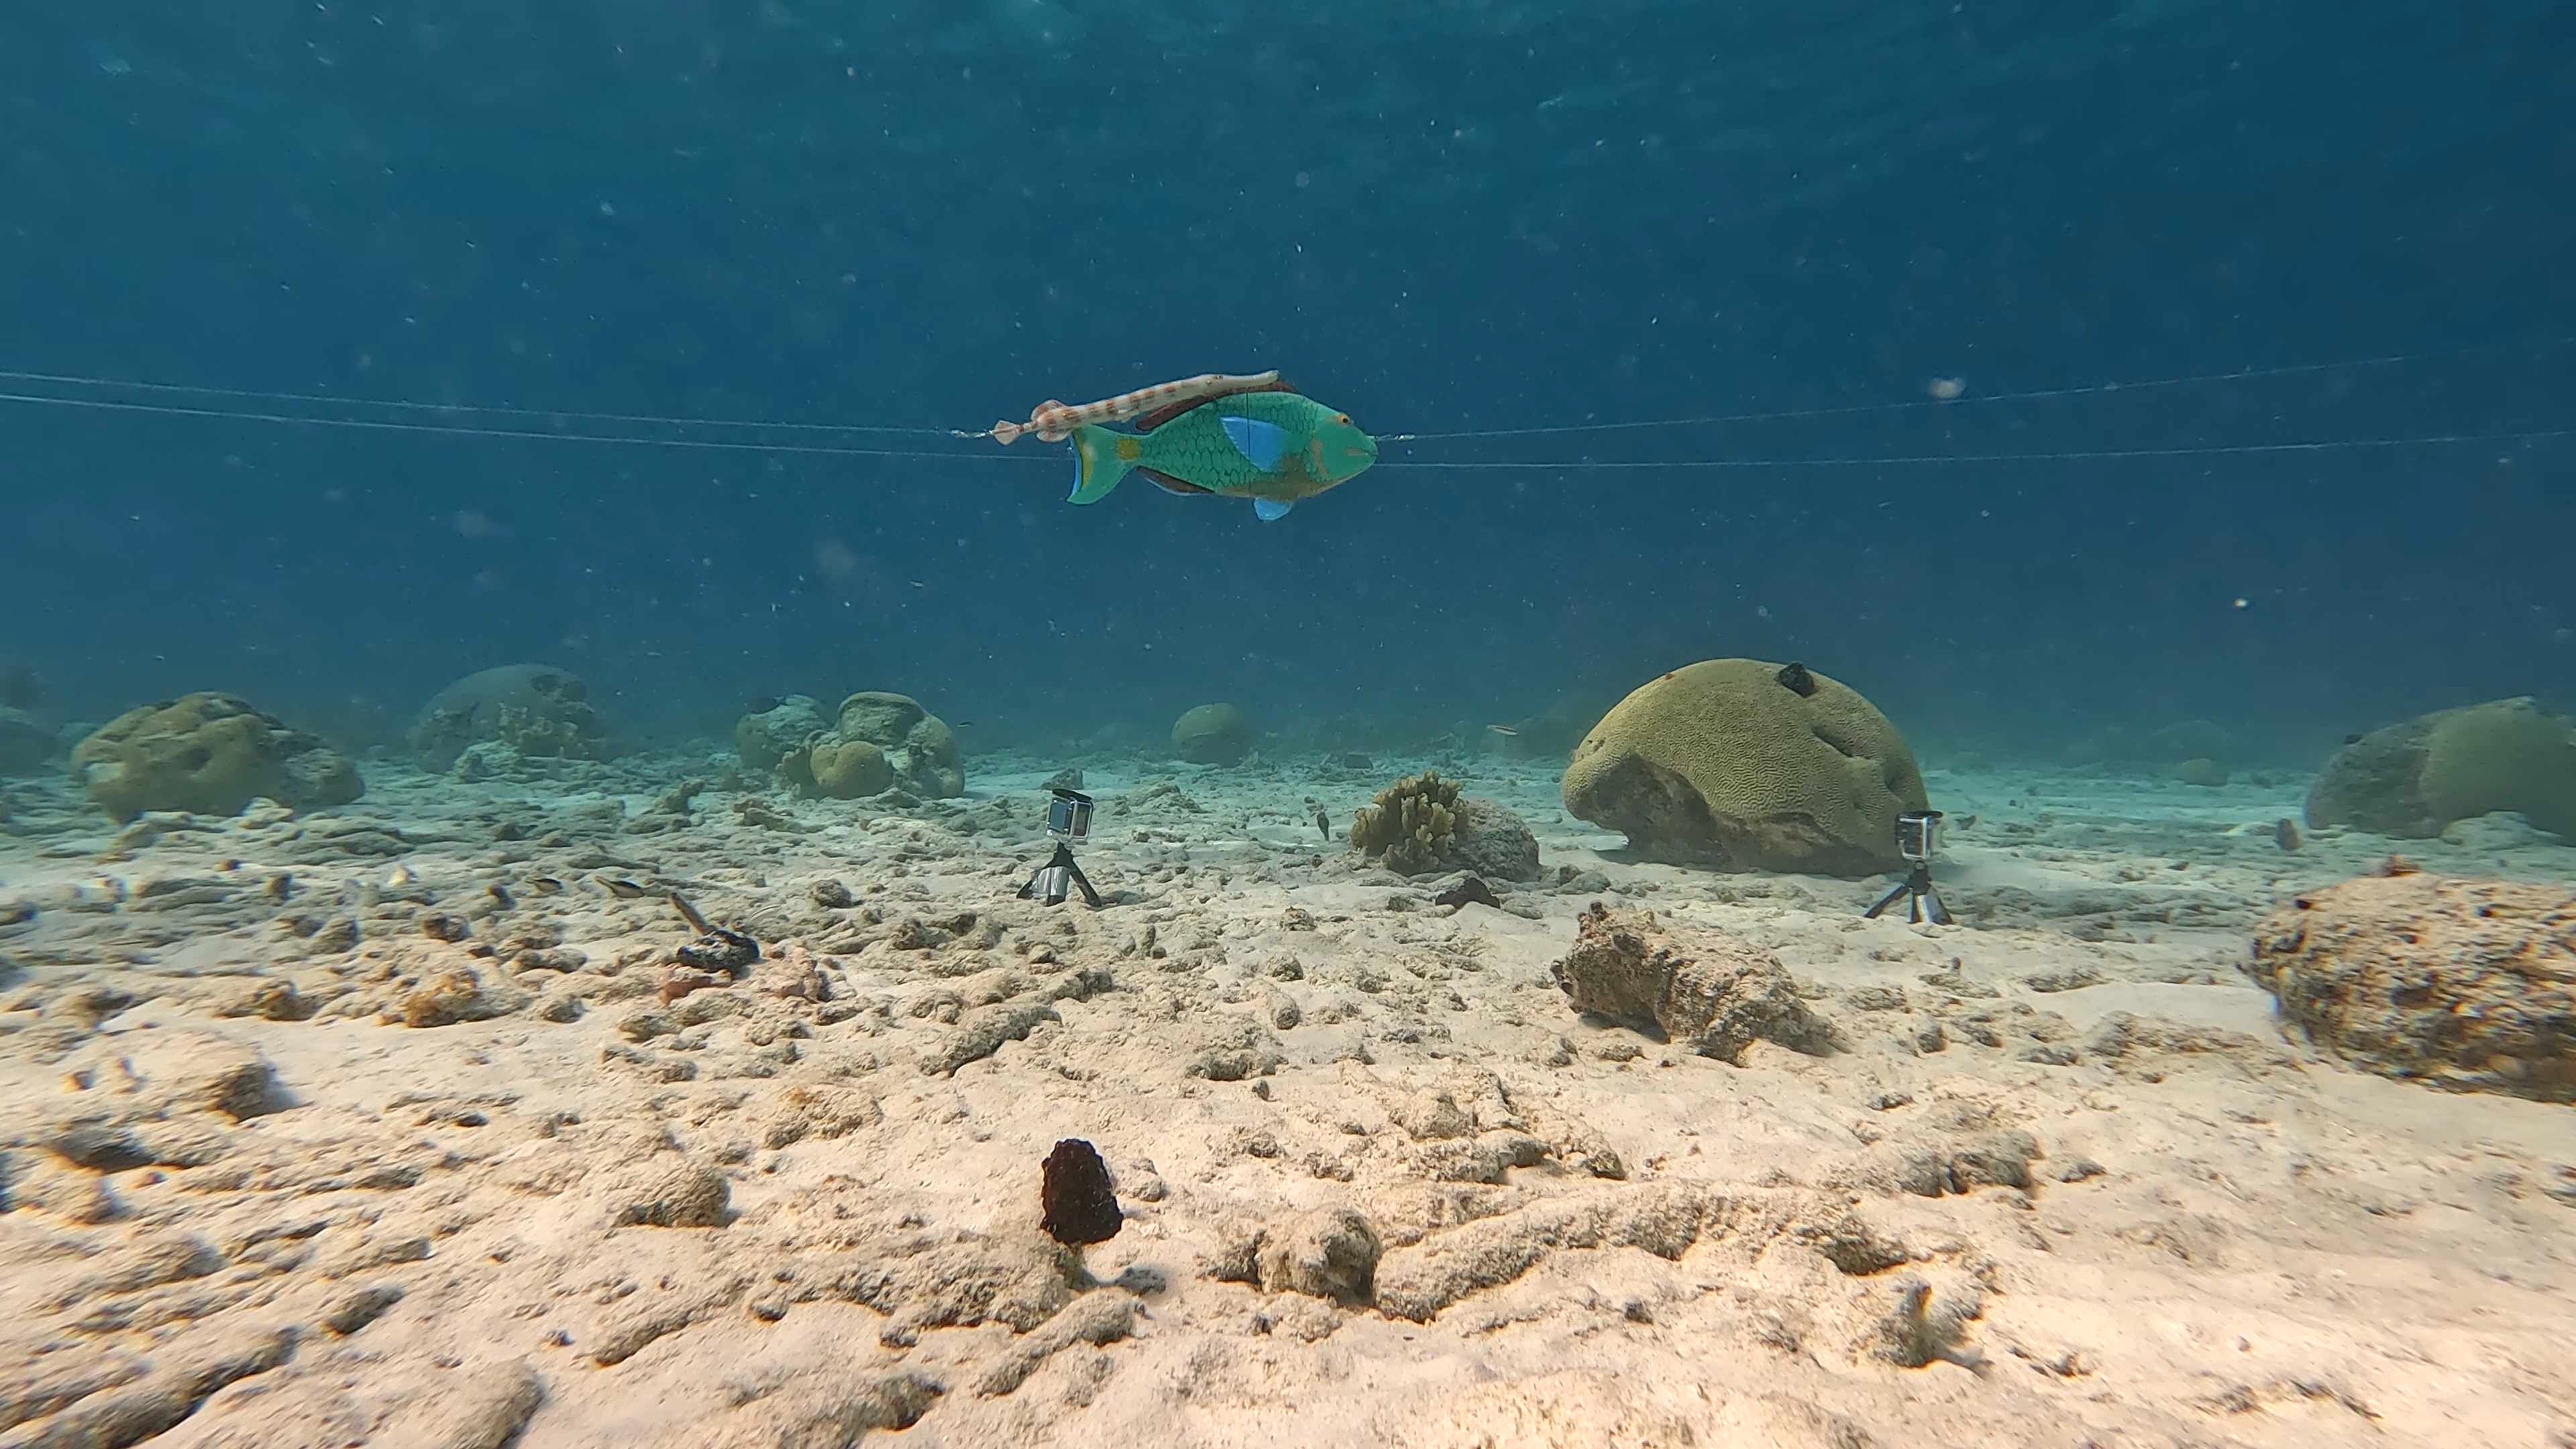 3D models of a parrotfish and trumpetfish are pulled on a line across a sandy reef.